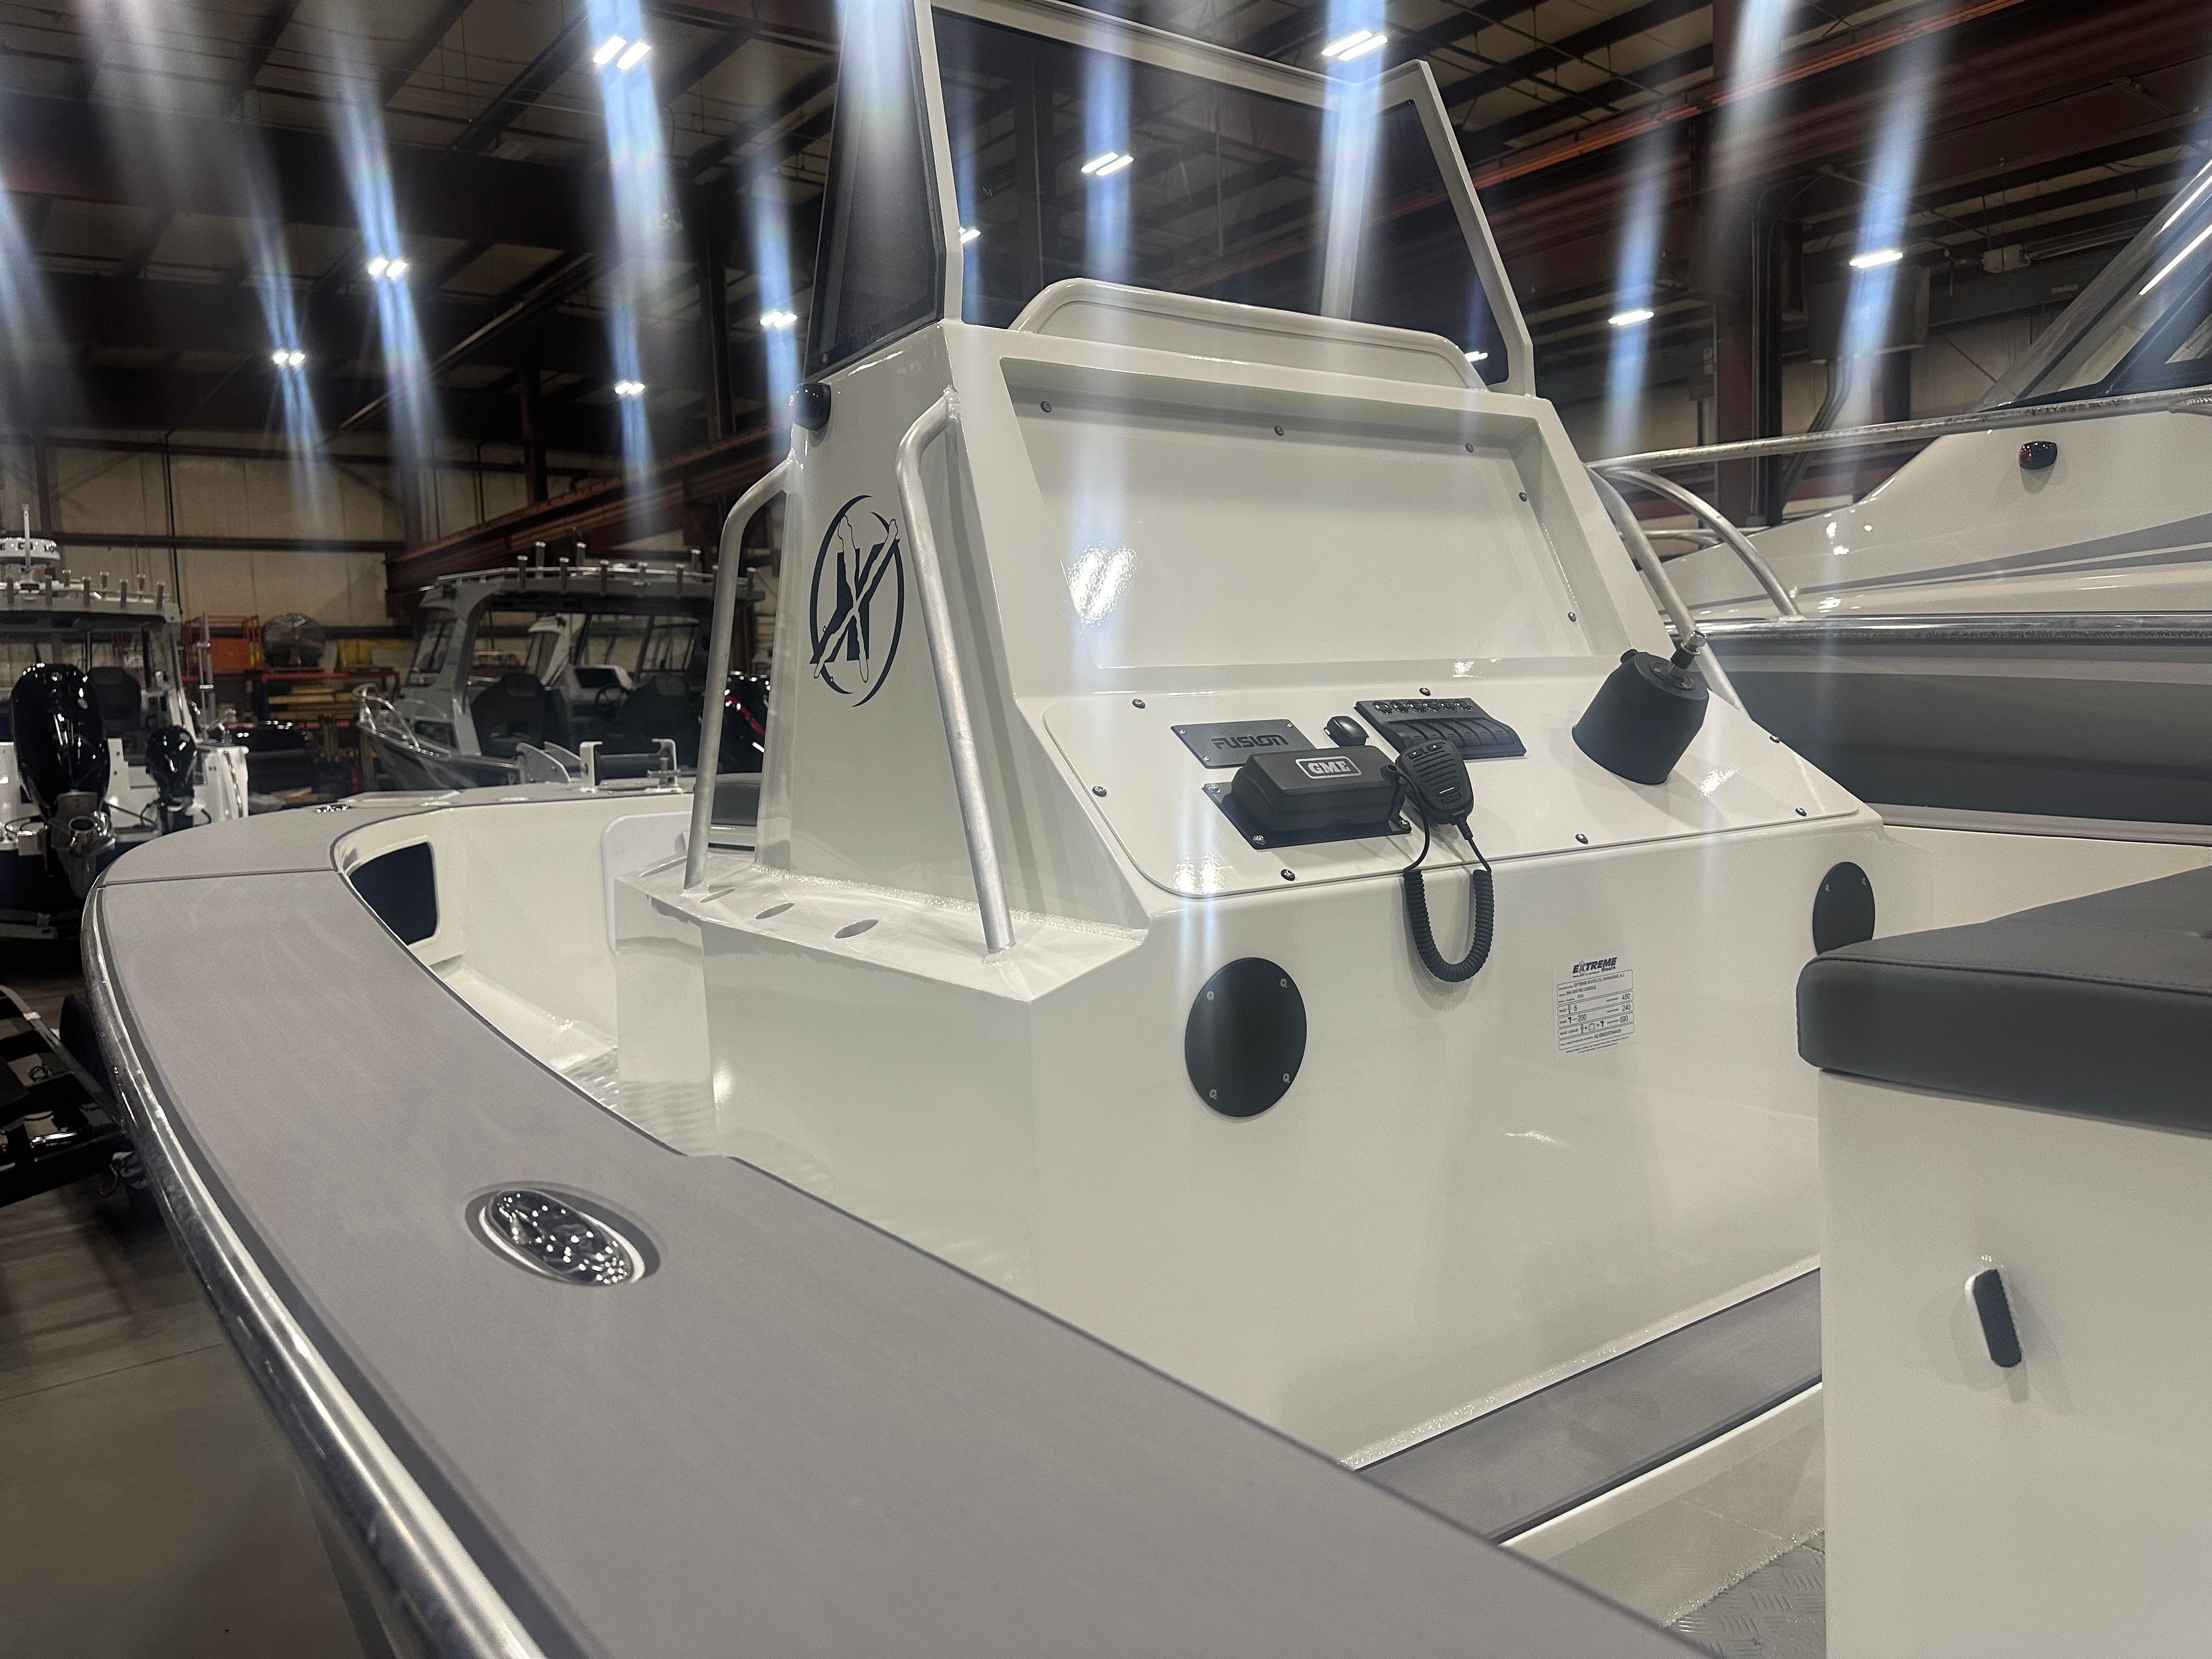 Gunnel and Center Console on Extreme Boats 645 CC 